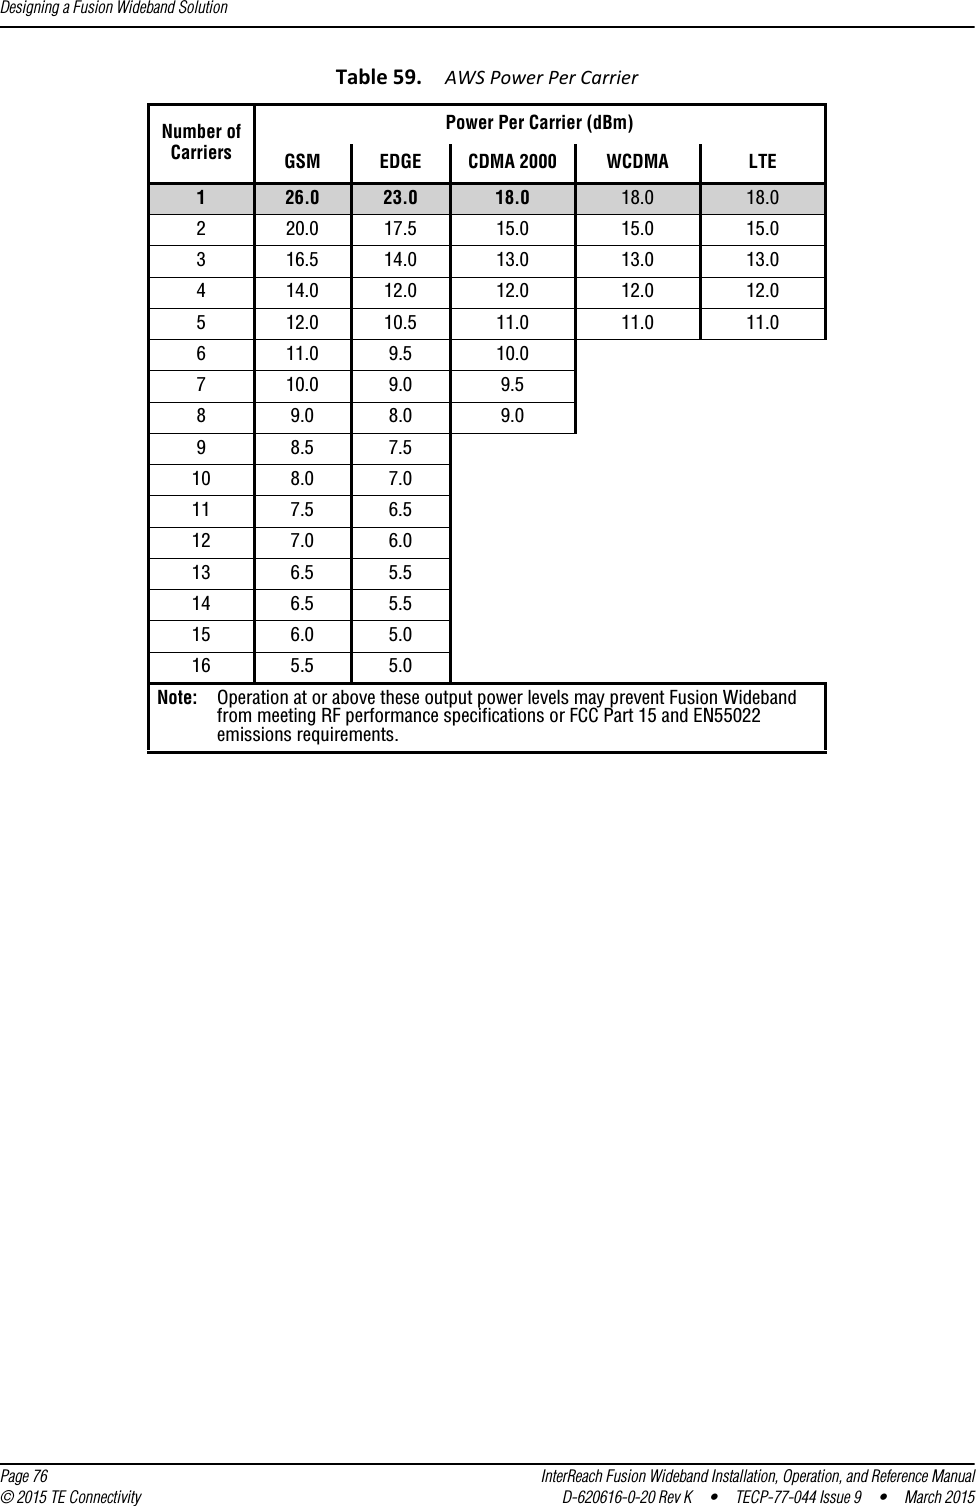 Designing a Fusion Wideband Solution  Page 76 InterReach Fusion Wideband Installation, Operation, and Reference Manual© 2015 TE Connectivity D-620616-0-20 Rev K  •  TECP-77-044 Issue 9  •  March 2015Table 59. AWS Power Per CarrierNumber ofCarriersPower Per Carrier (dBm)GSM EDGE CDMA 2000 WCDMA LTE126.0 23.0 18.0 18.0 18.0220.0 17.5 15.0 15.0 15.0316.5 14.0 13.0 13.0 13.0414.0 12.0 12.0 12.0 12.0512.0 10.5 11.0 11.0 11.0611.0 9.5 10.0710.0 9.0 9.589.0 8.0 9.098.5 7.510 8.0 7.011 7.5 6.512 7.0 6.013 6.5 5.514 6.5 5.515 6.0 5.016 5.5 5.0Note: Operation at or above these output power levels may prevent Fusion Wideband from meeting RF performance specifications or FCC Part 15 and EN55022 emissions requirements. 